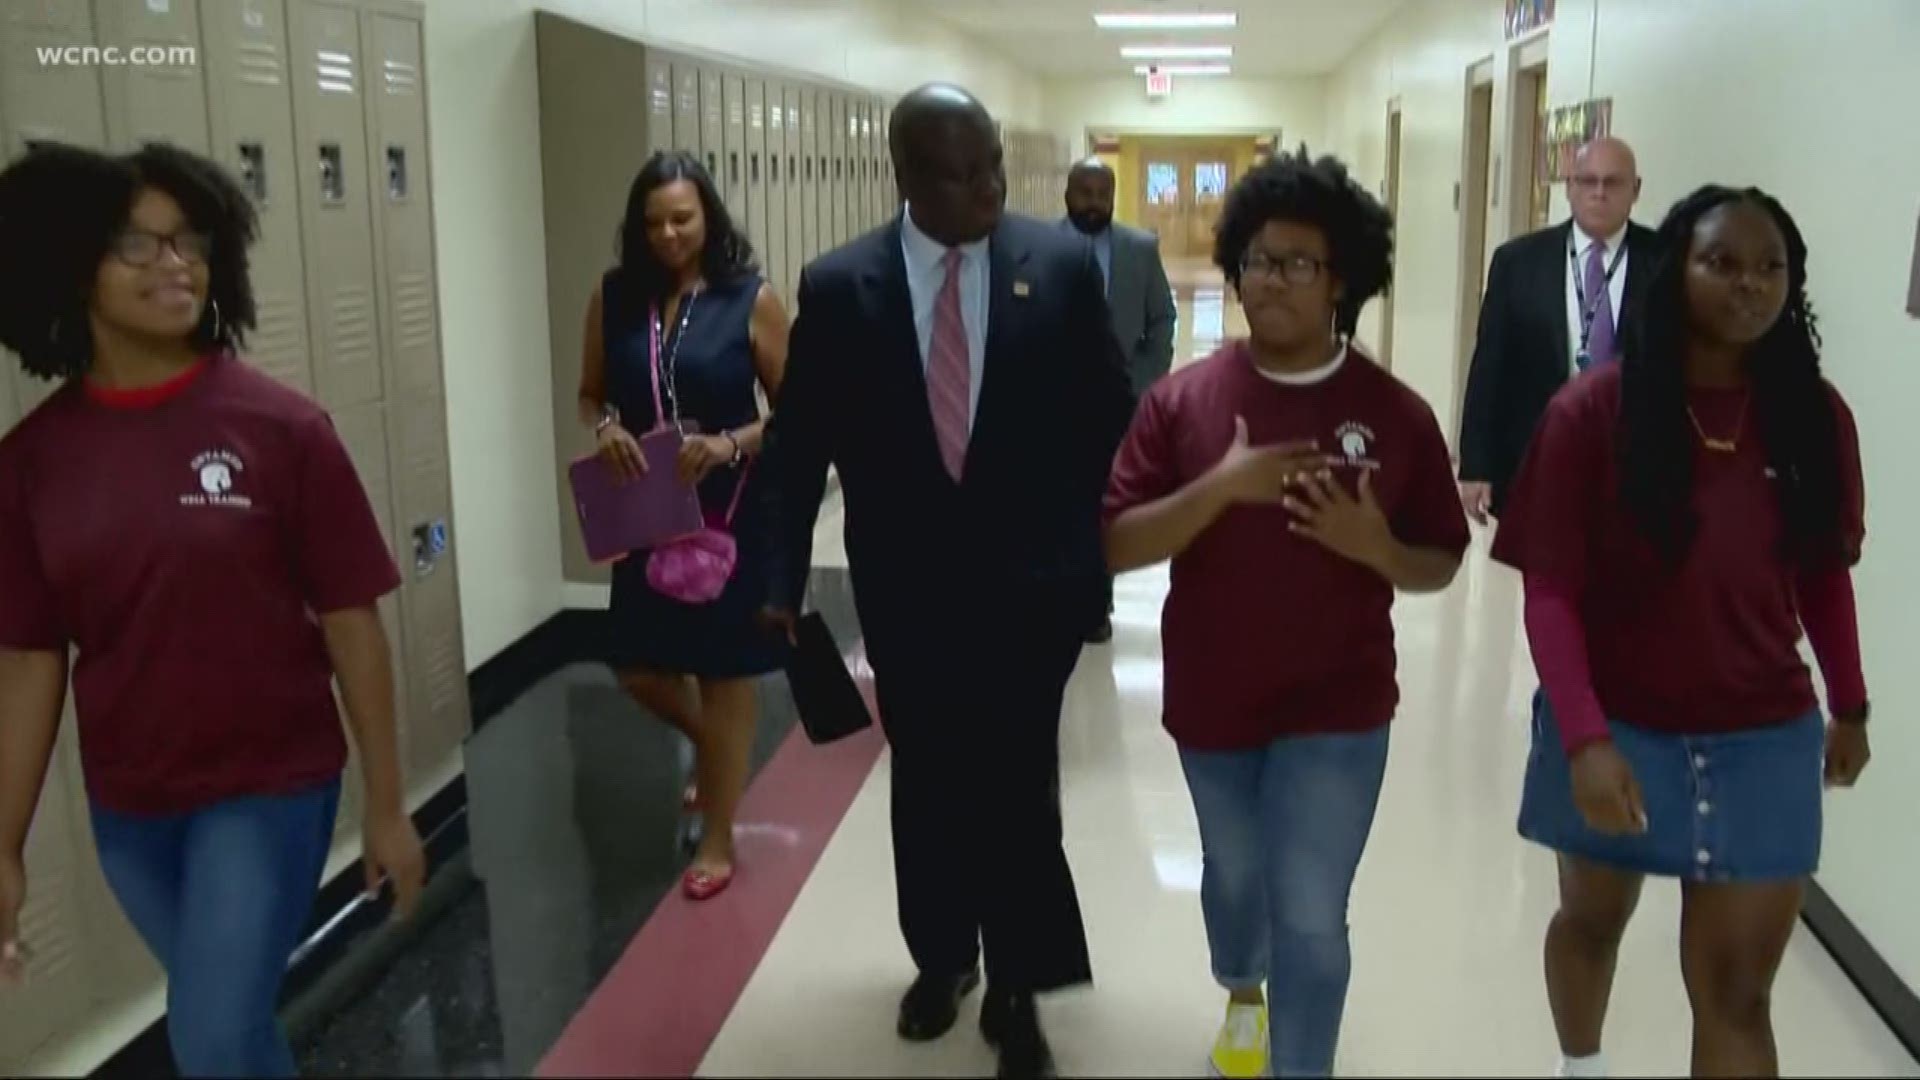 The new CMS Superintendent Earnest Winston gave an update on how the first day went, providing the number of teachers he needs to hire as well as the teachers who still need to go through the fingerprinting process.